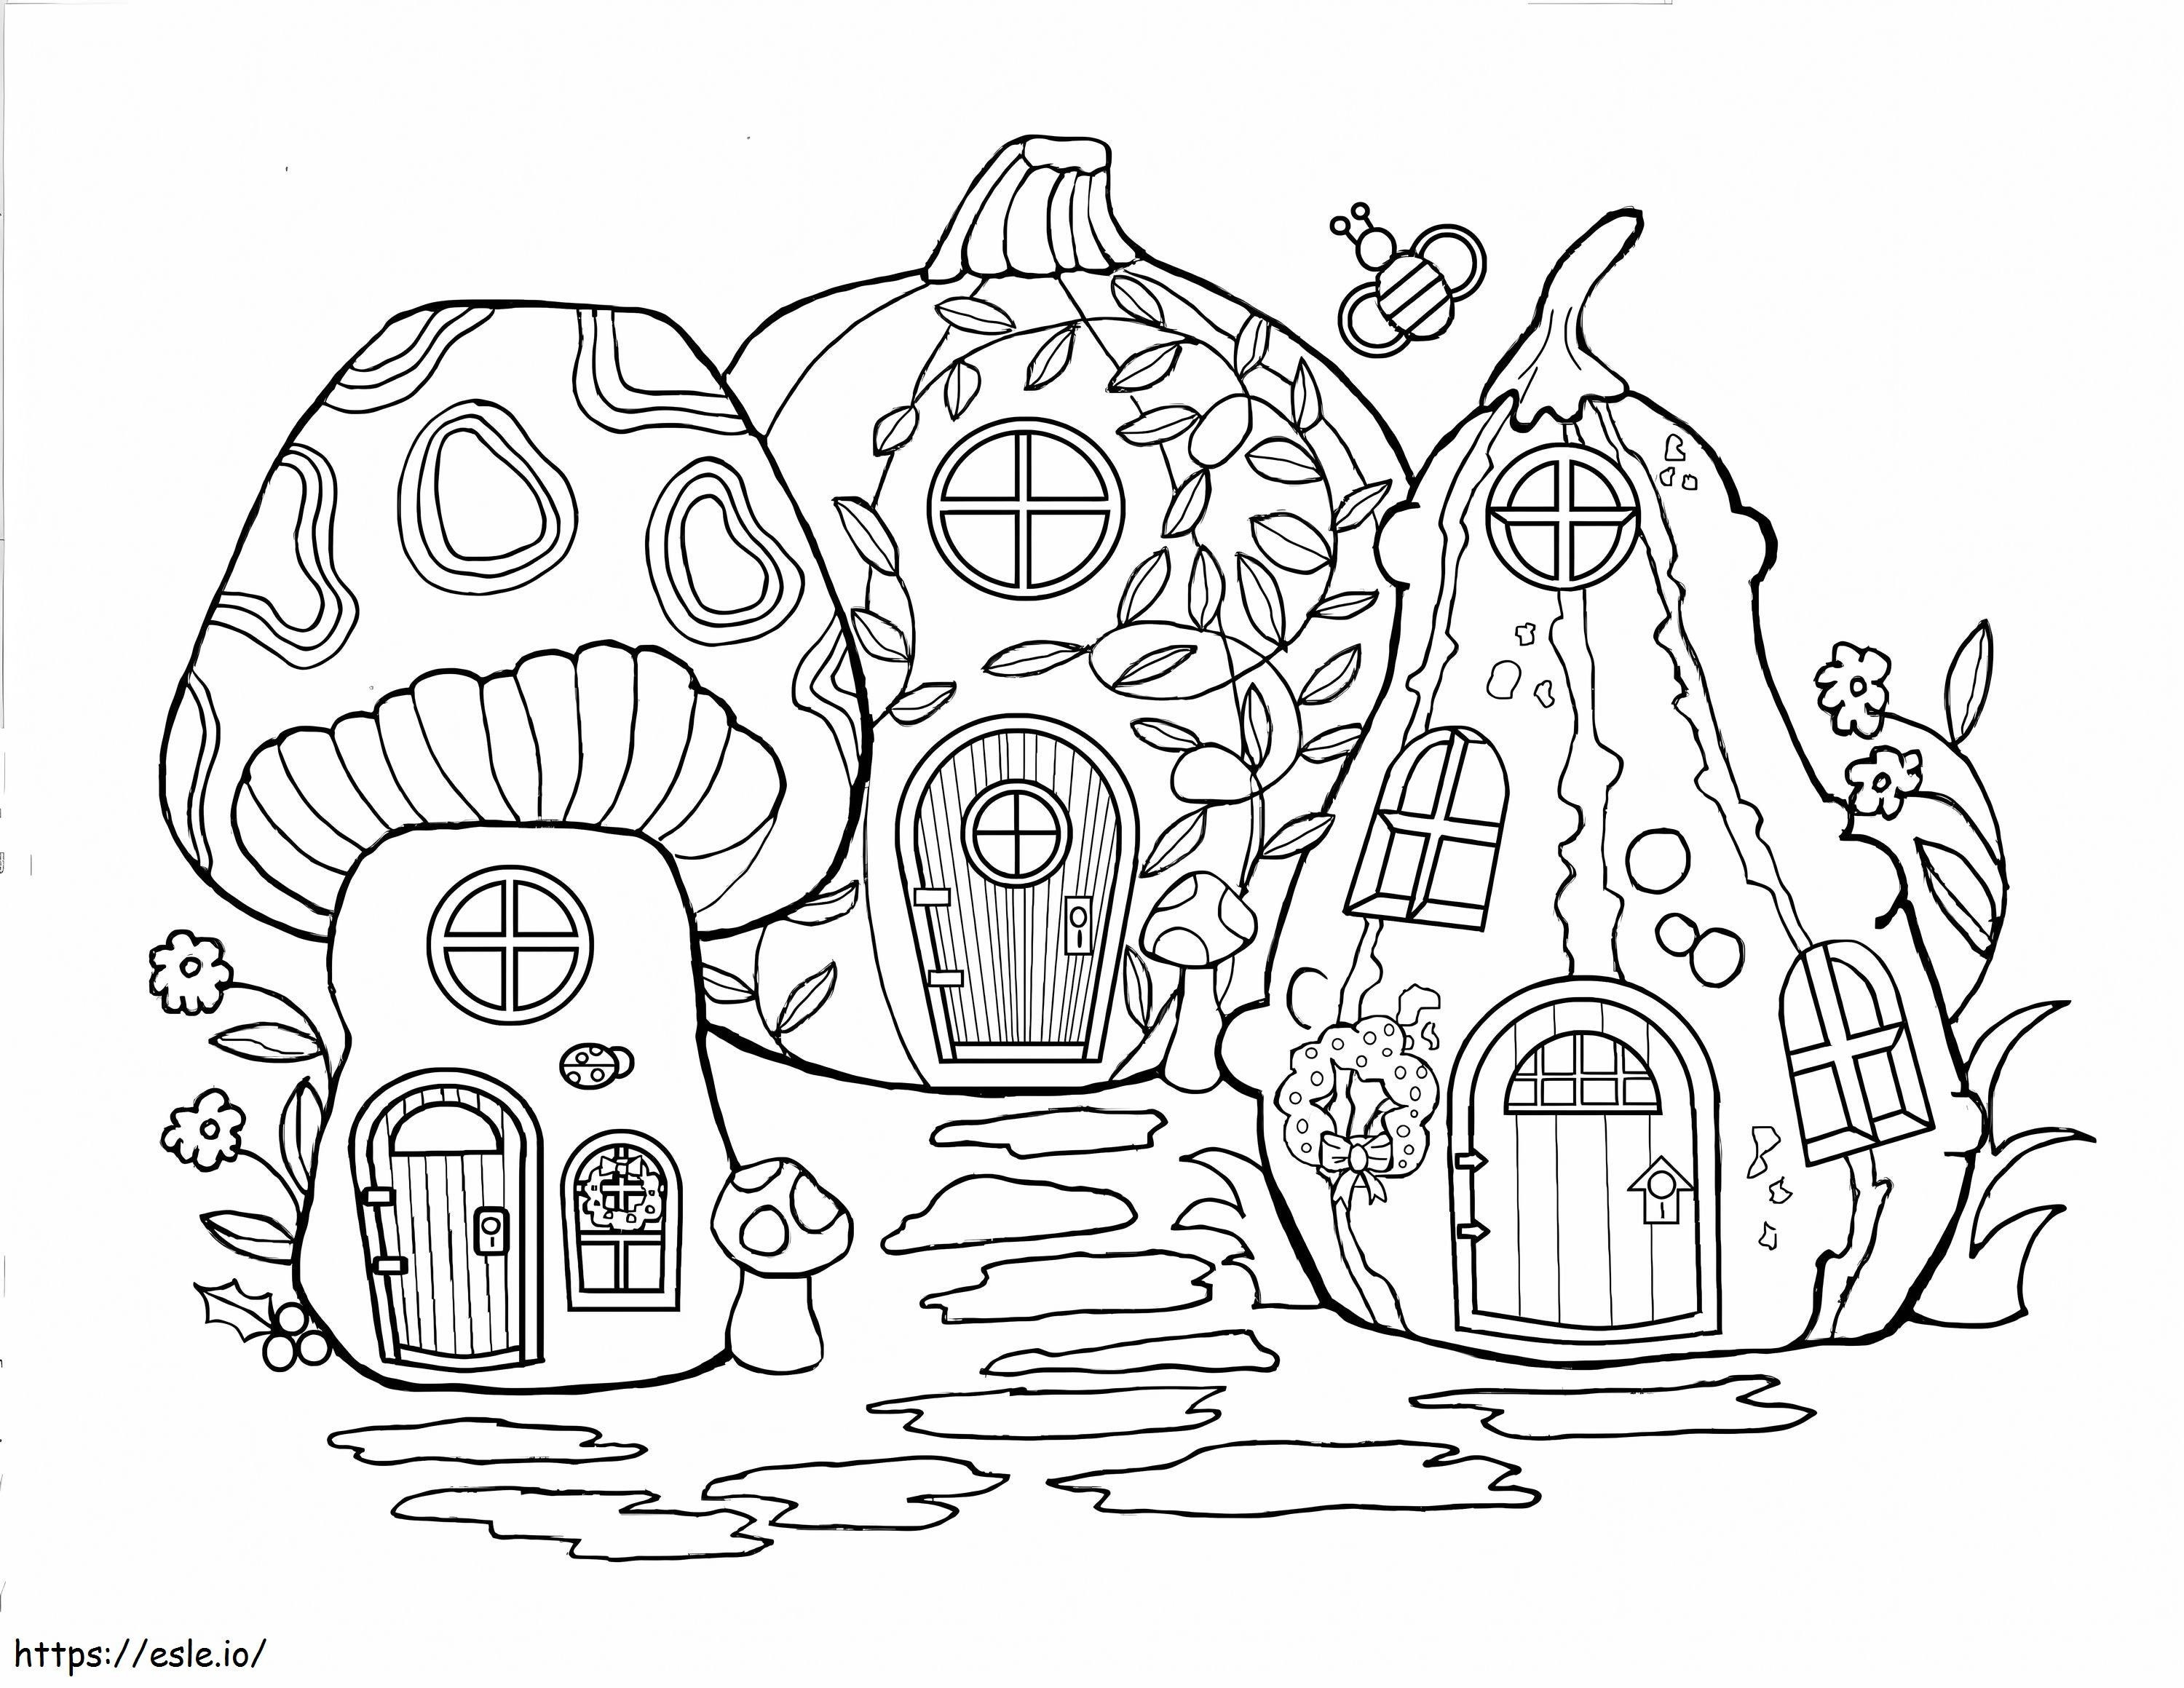 Big Fairy House coloring page